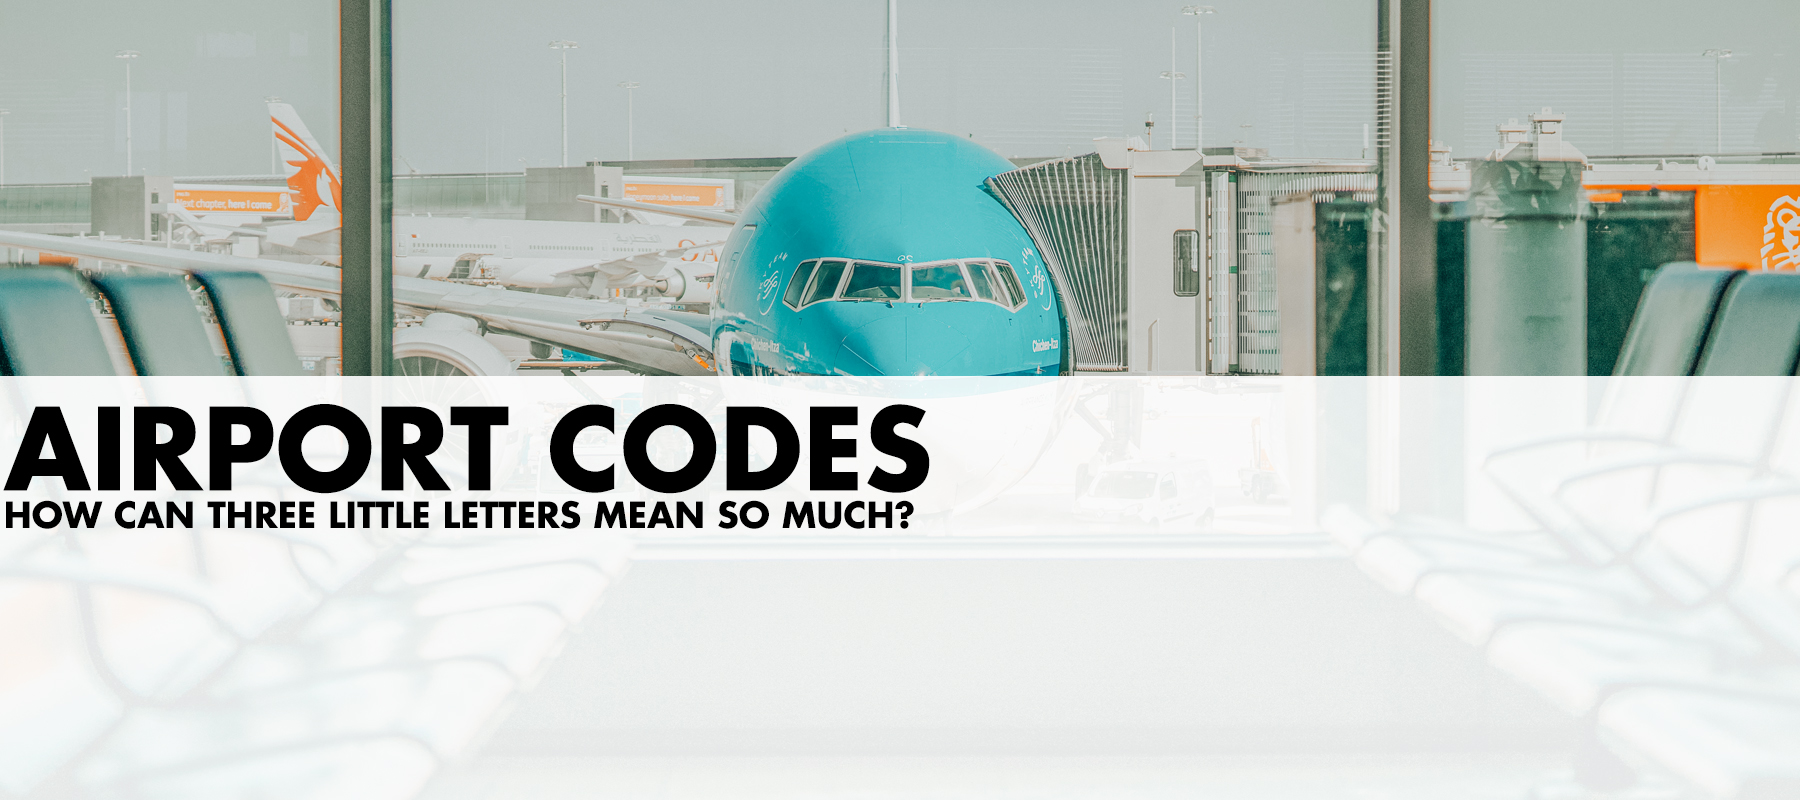 AIRPORT CODES